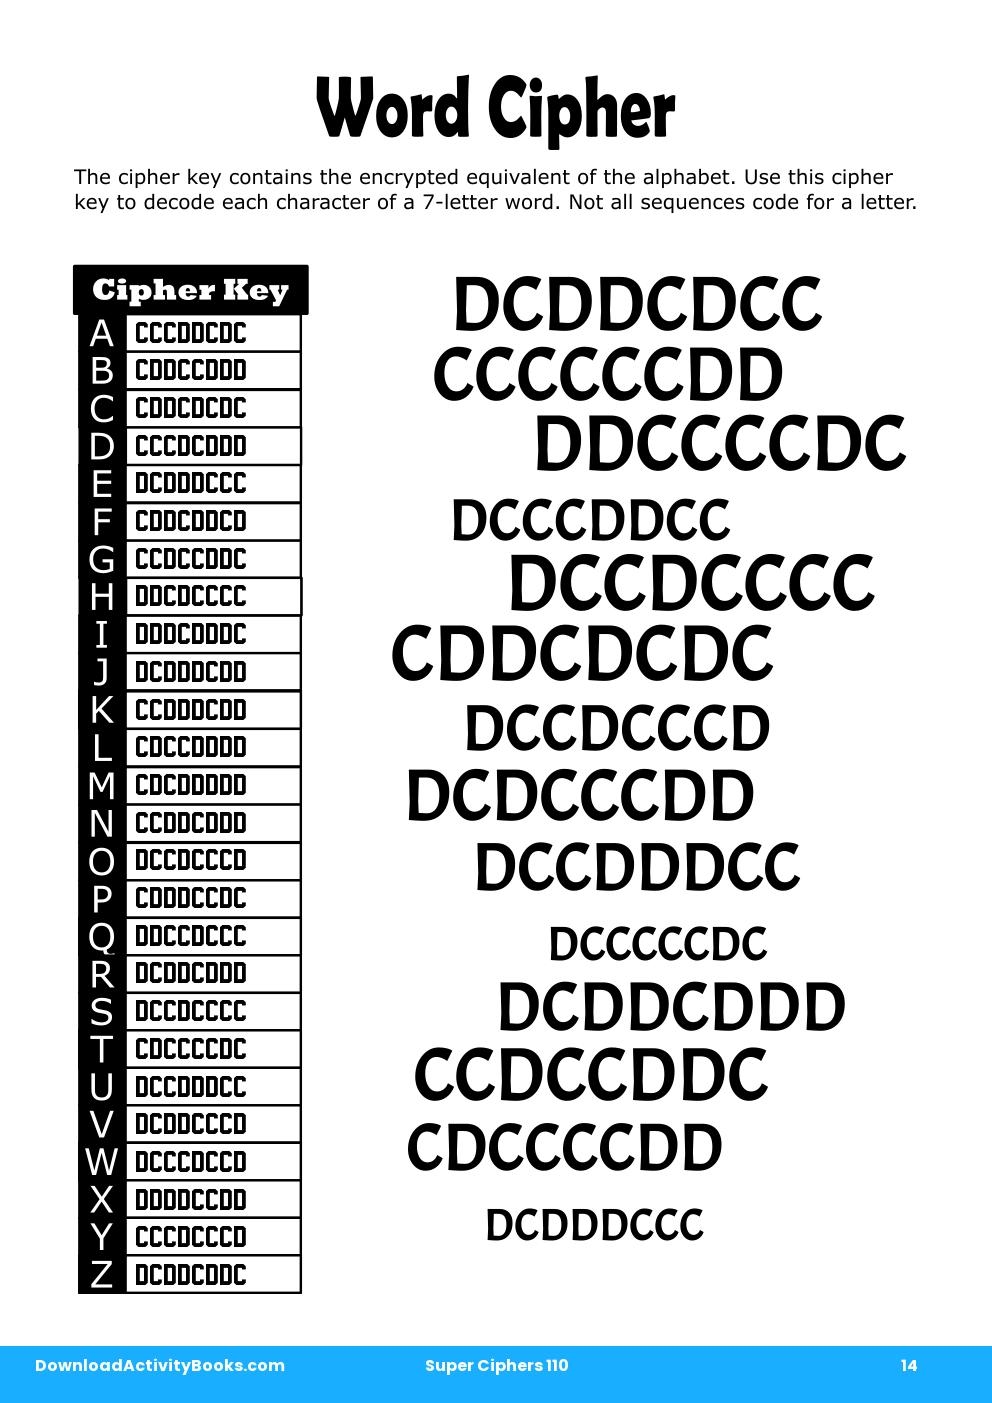 Word Cipher in Super Ciphers 110